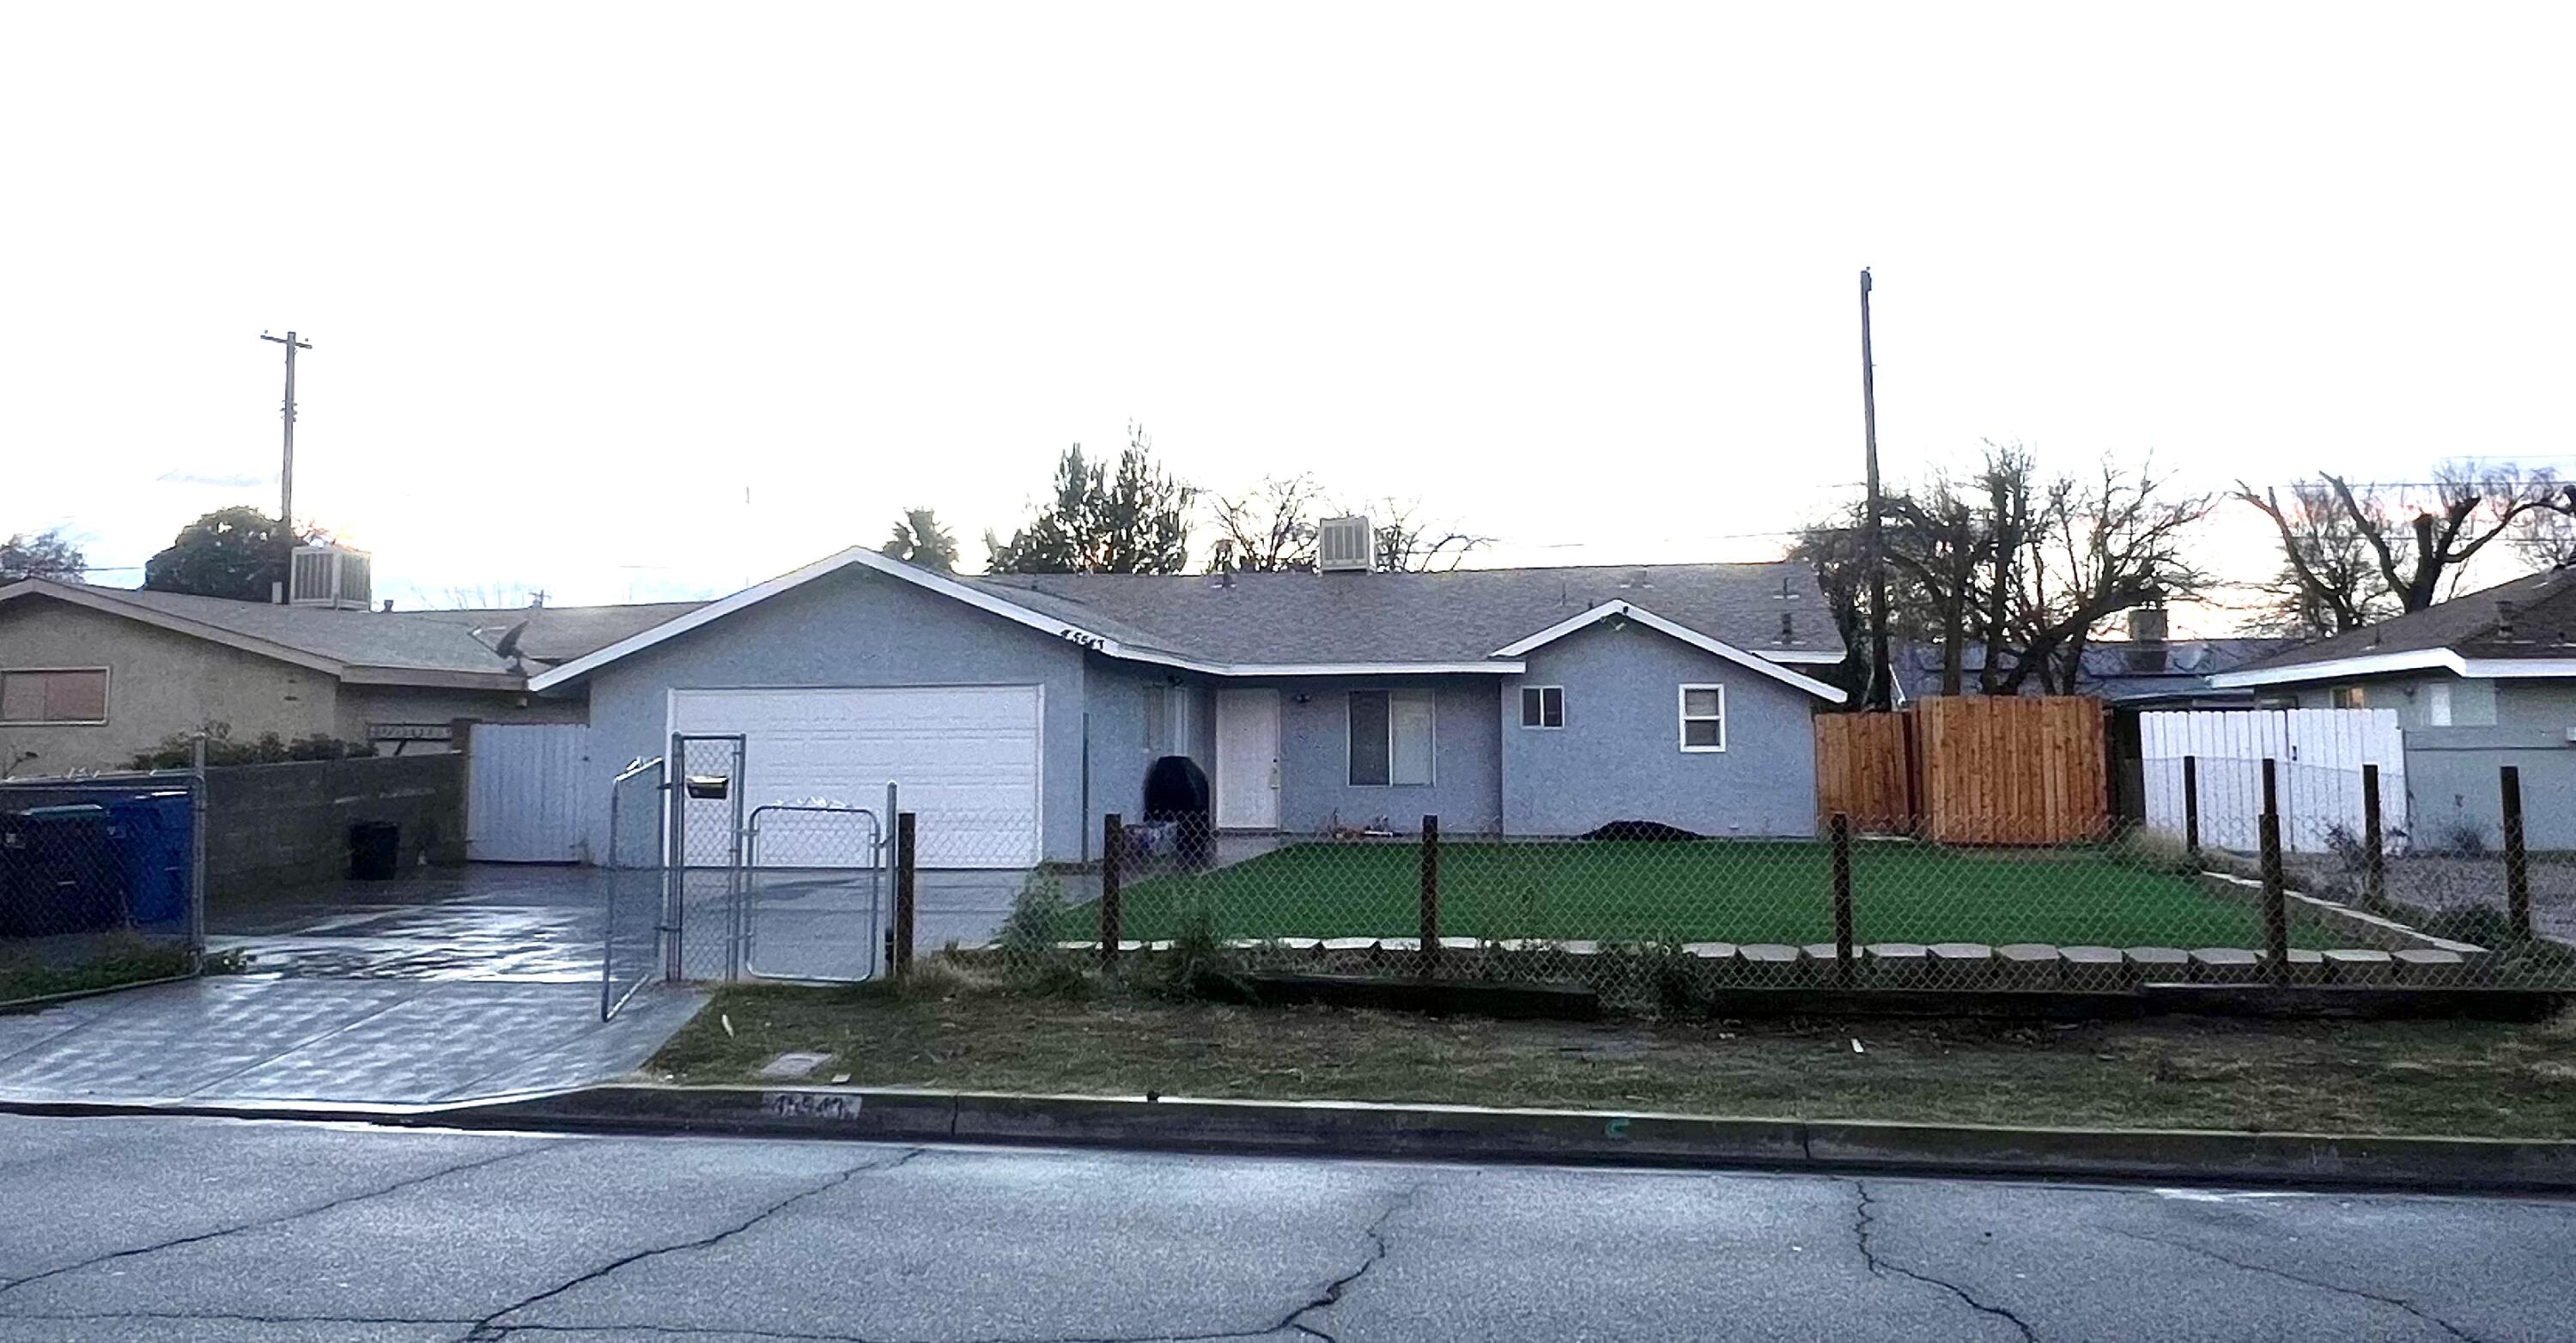 a view of a house next to a yard